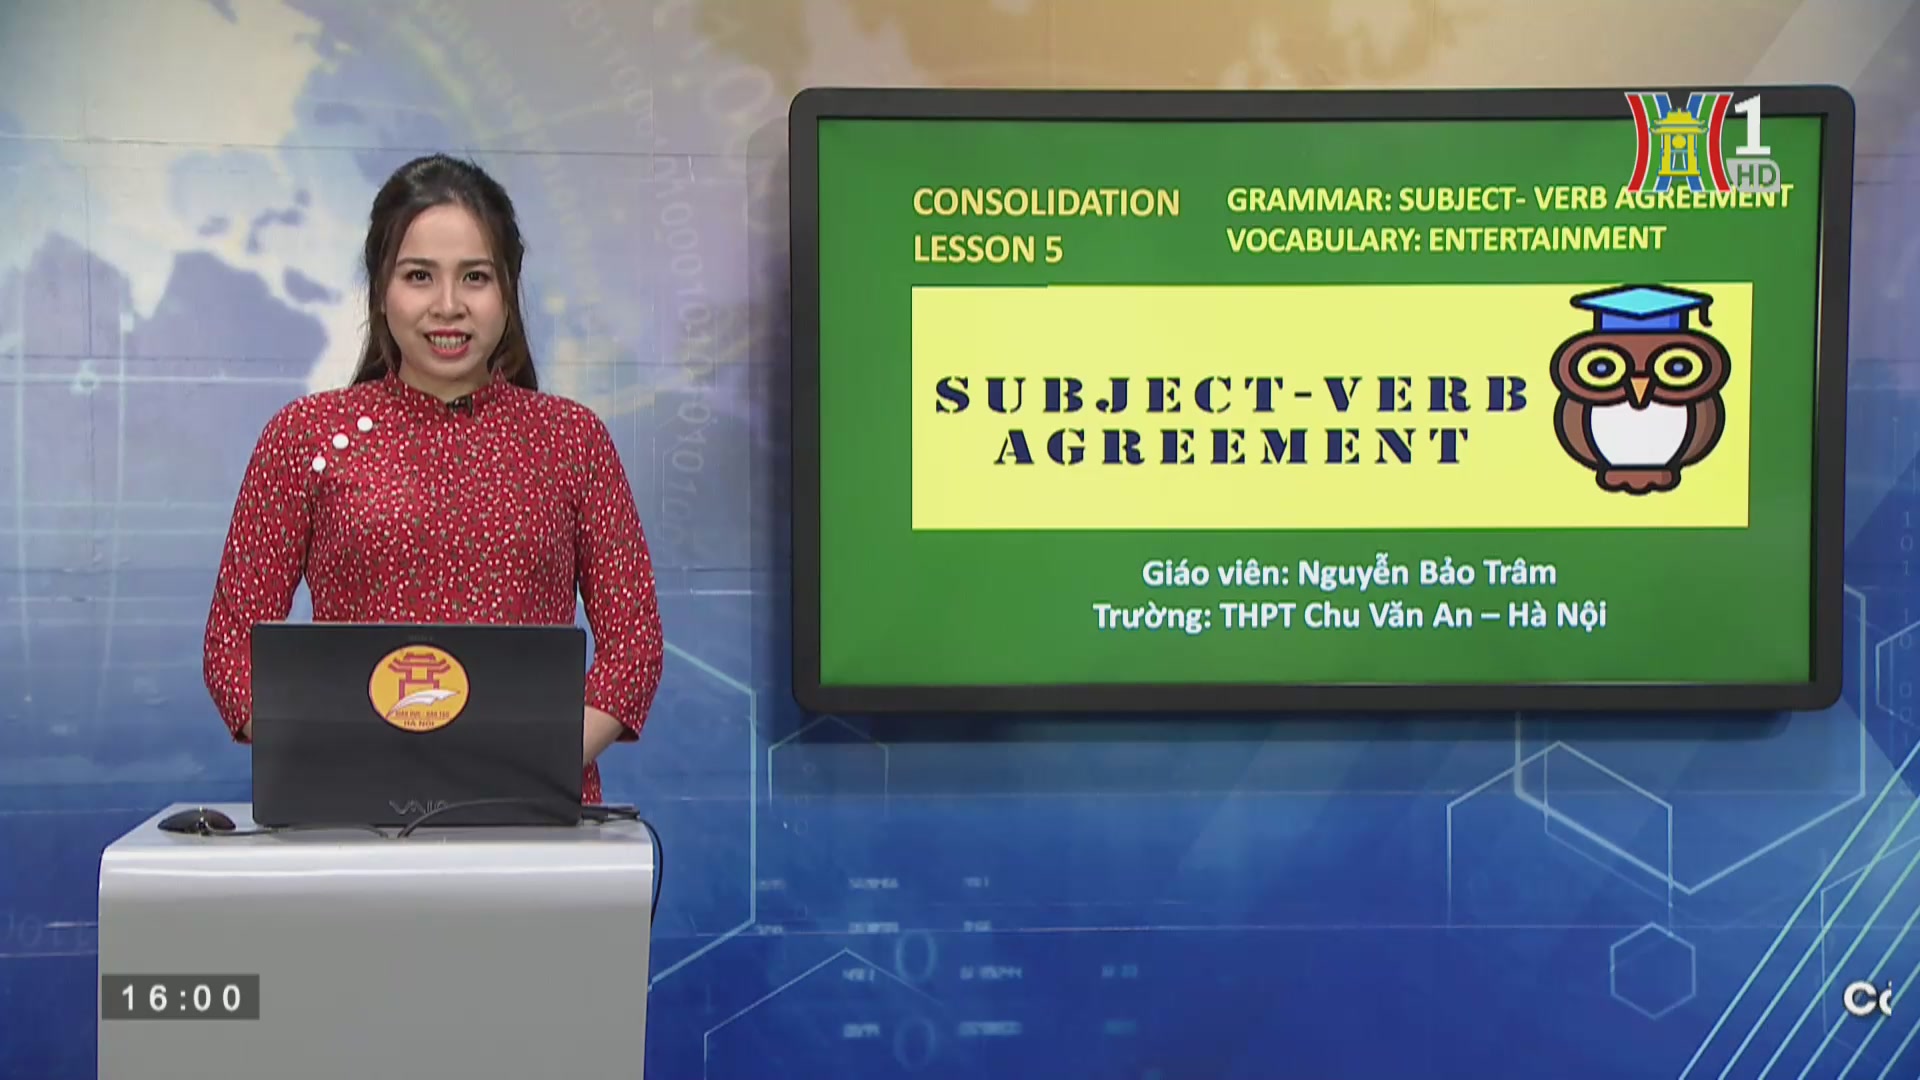 Tiếng anh lớp 12: Consolidation lesson5 (16h00 ngày 22/5/2020)